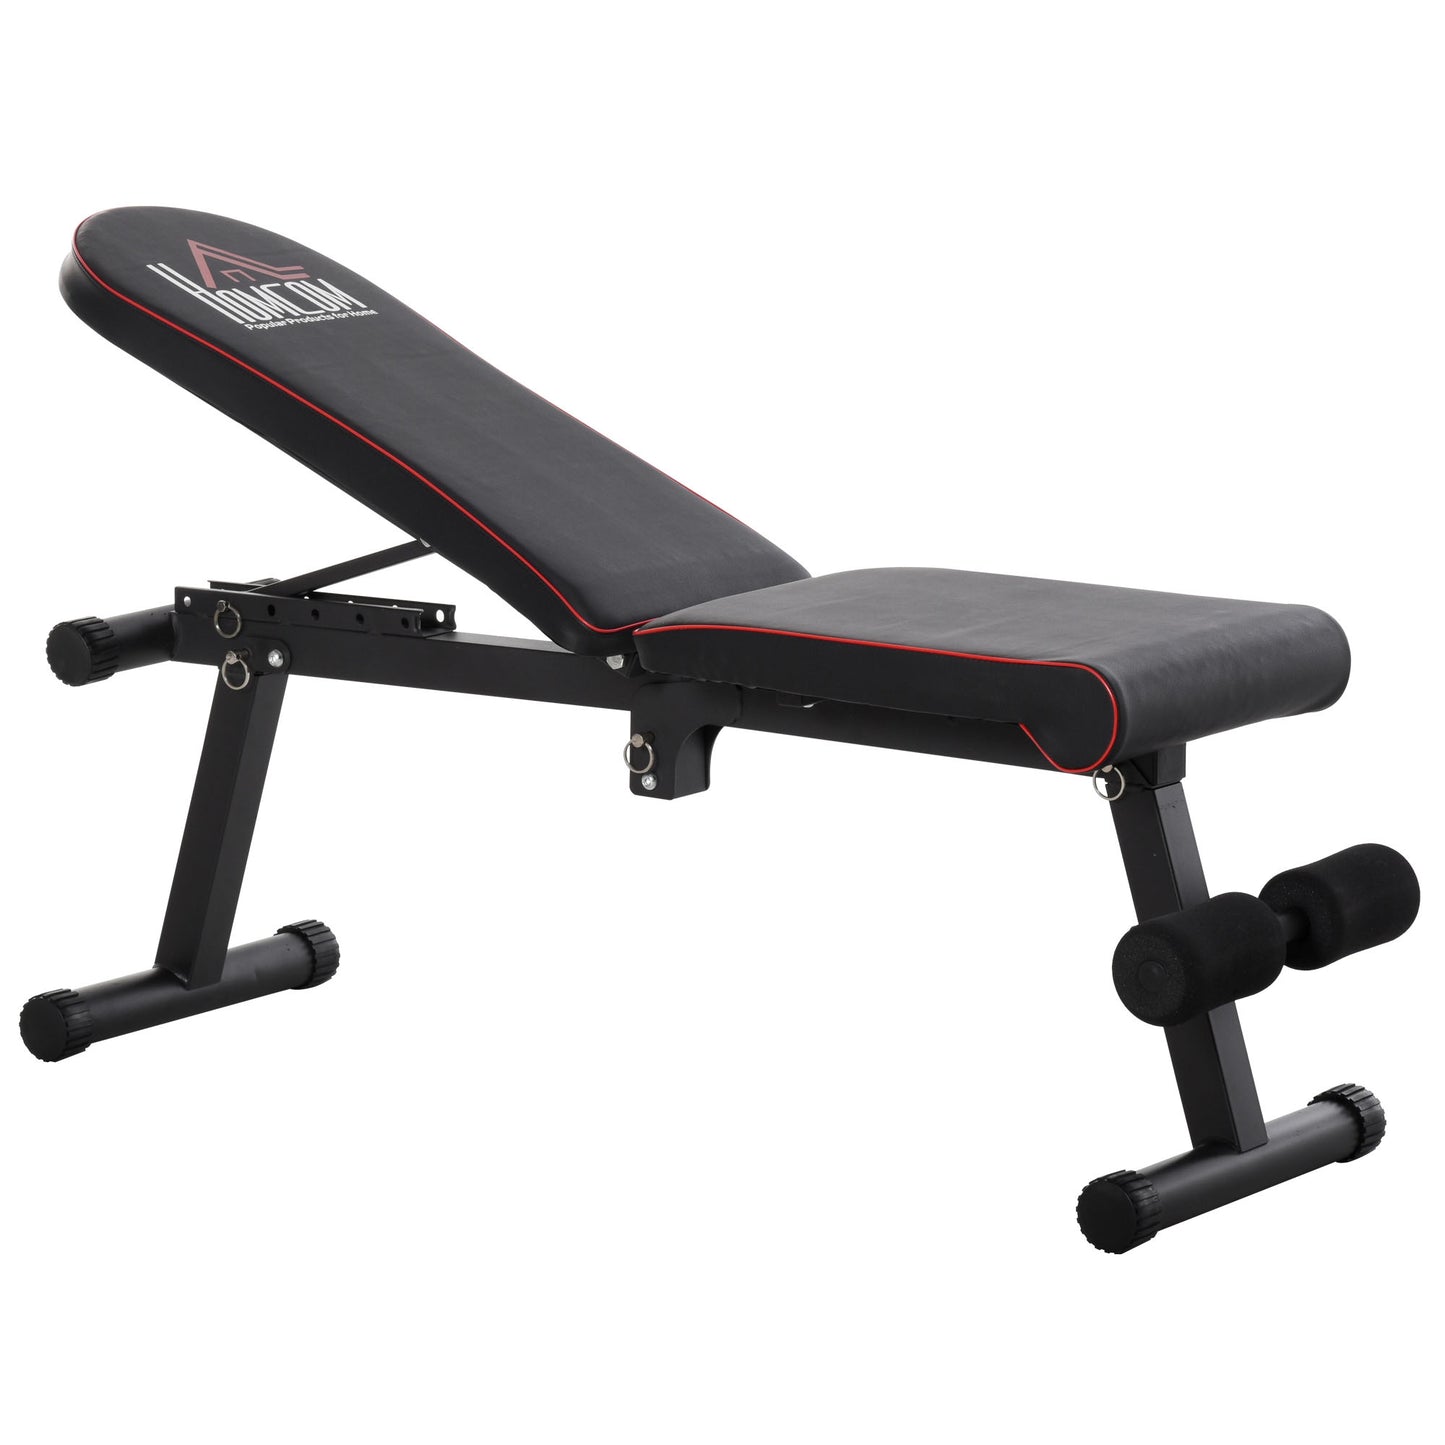 HOMCOM Foldable Sit Up Dumbbell Bench Adjustable Exercise Machine for Home Office